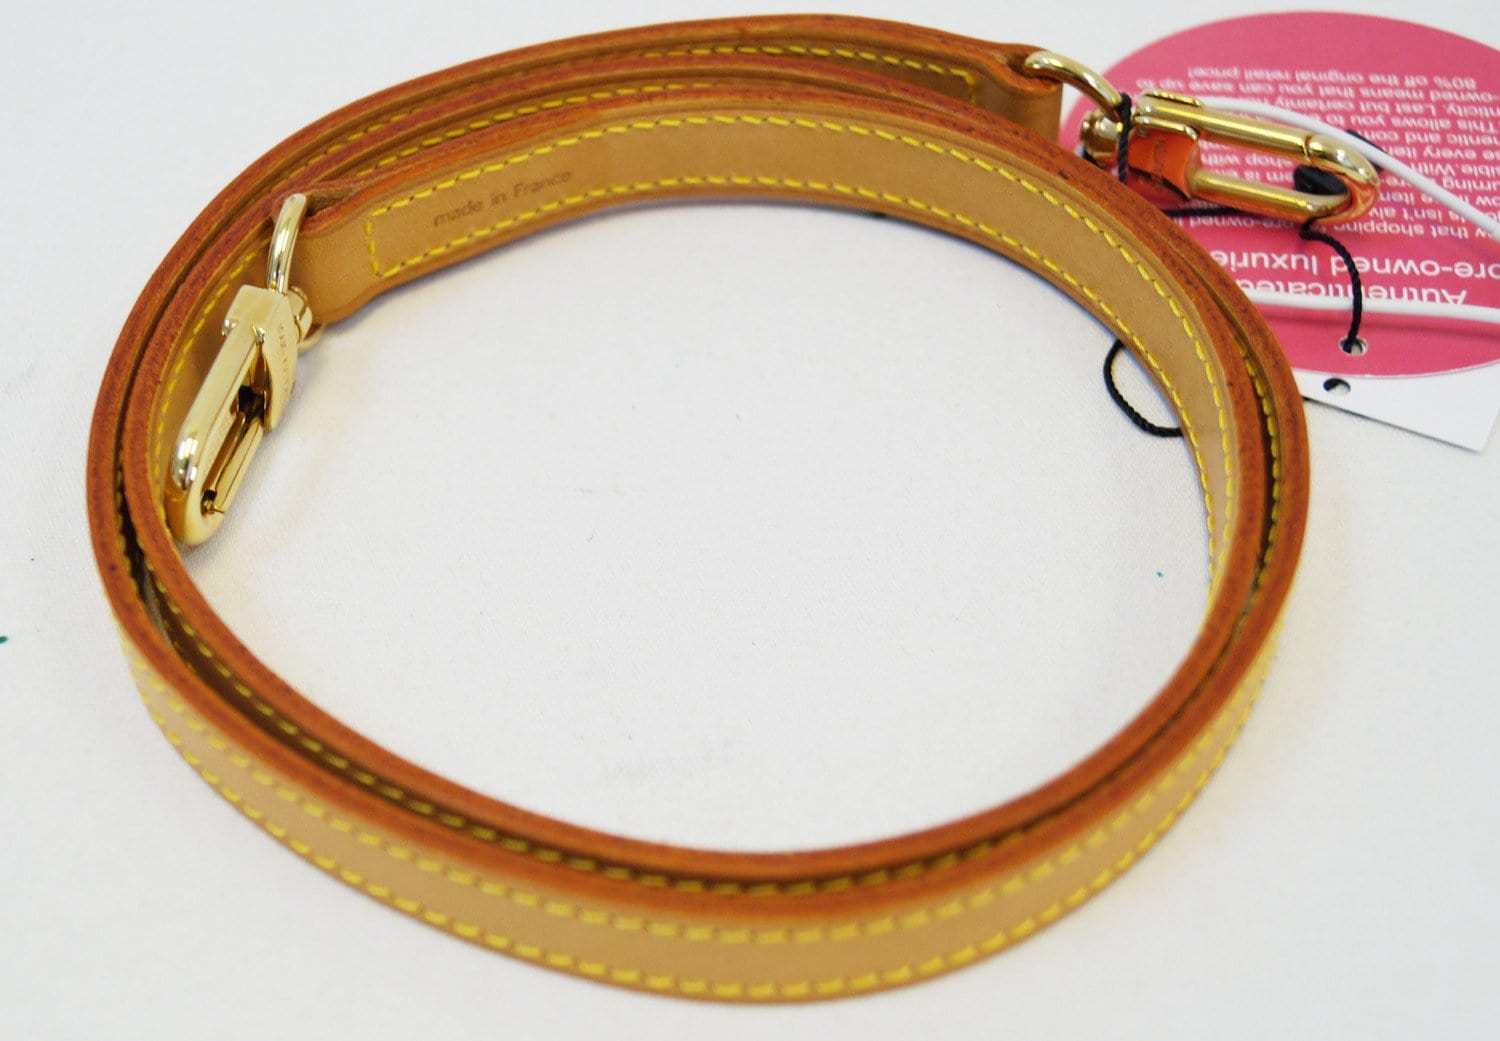 Crossbody Strap Replacement Natural Vachetta Leather or 